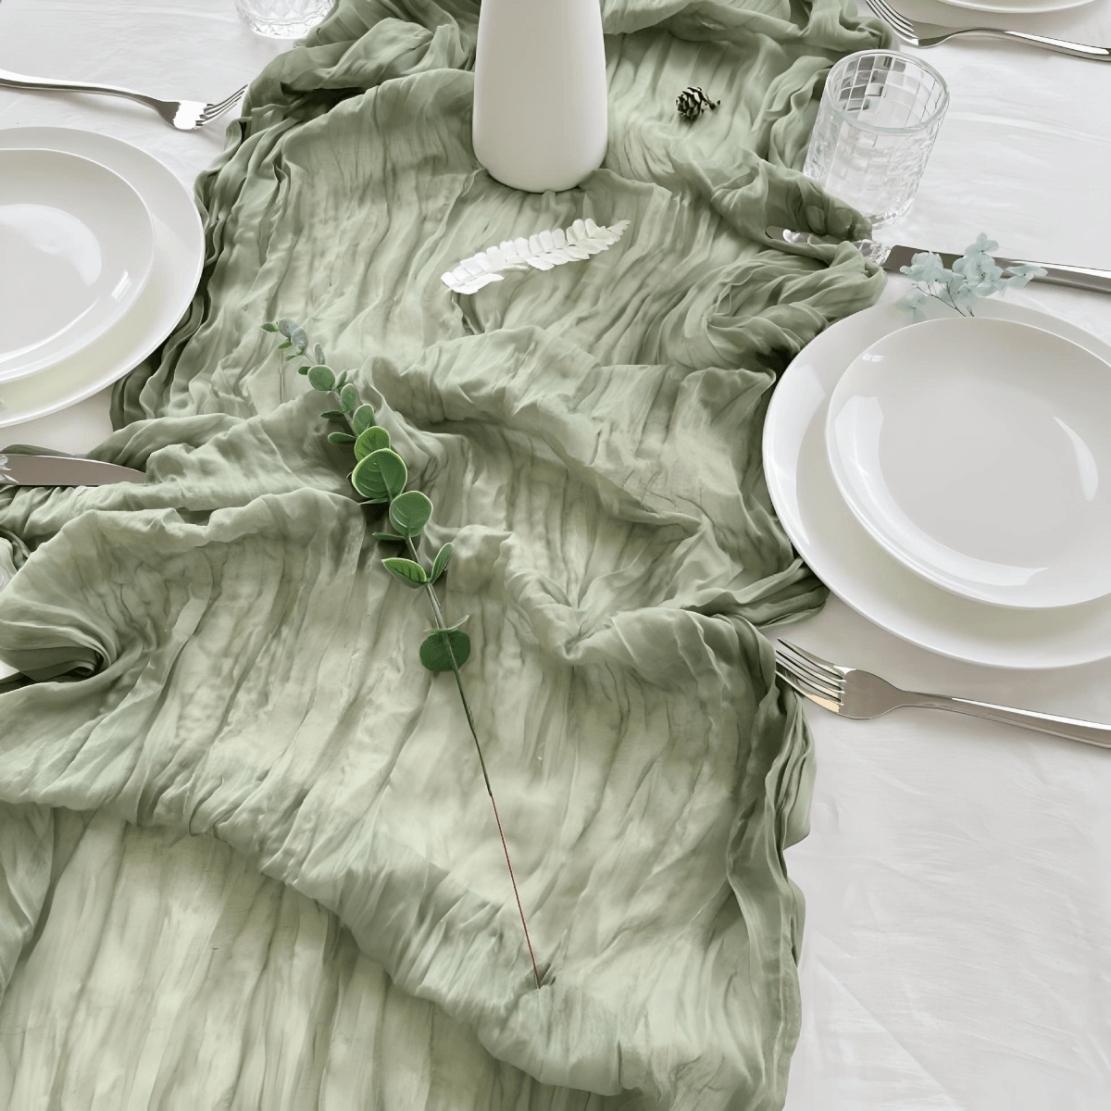 Green thin dining table decor tablecloth runner